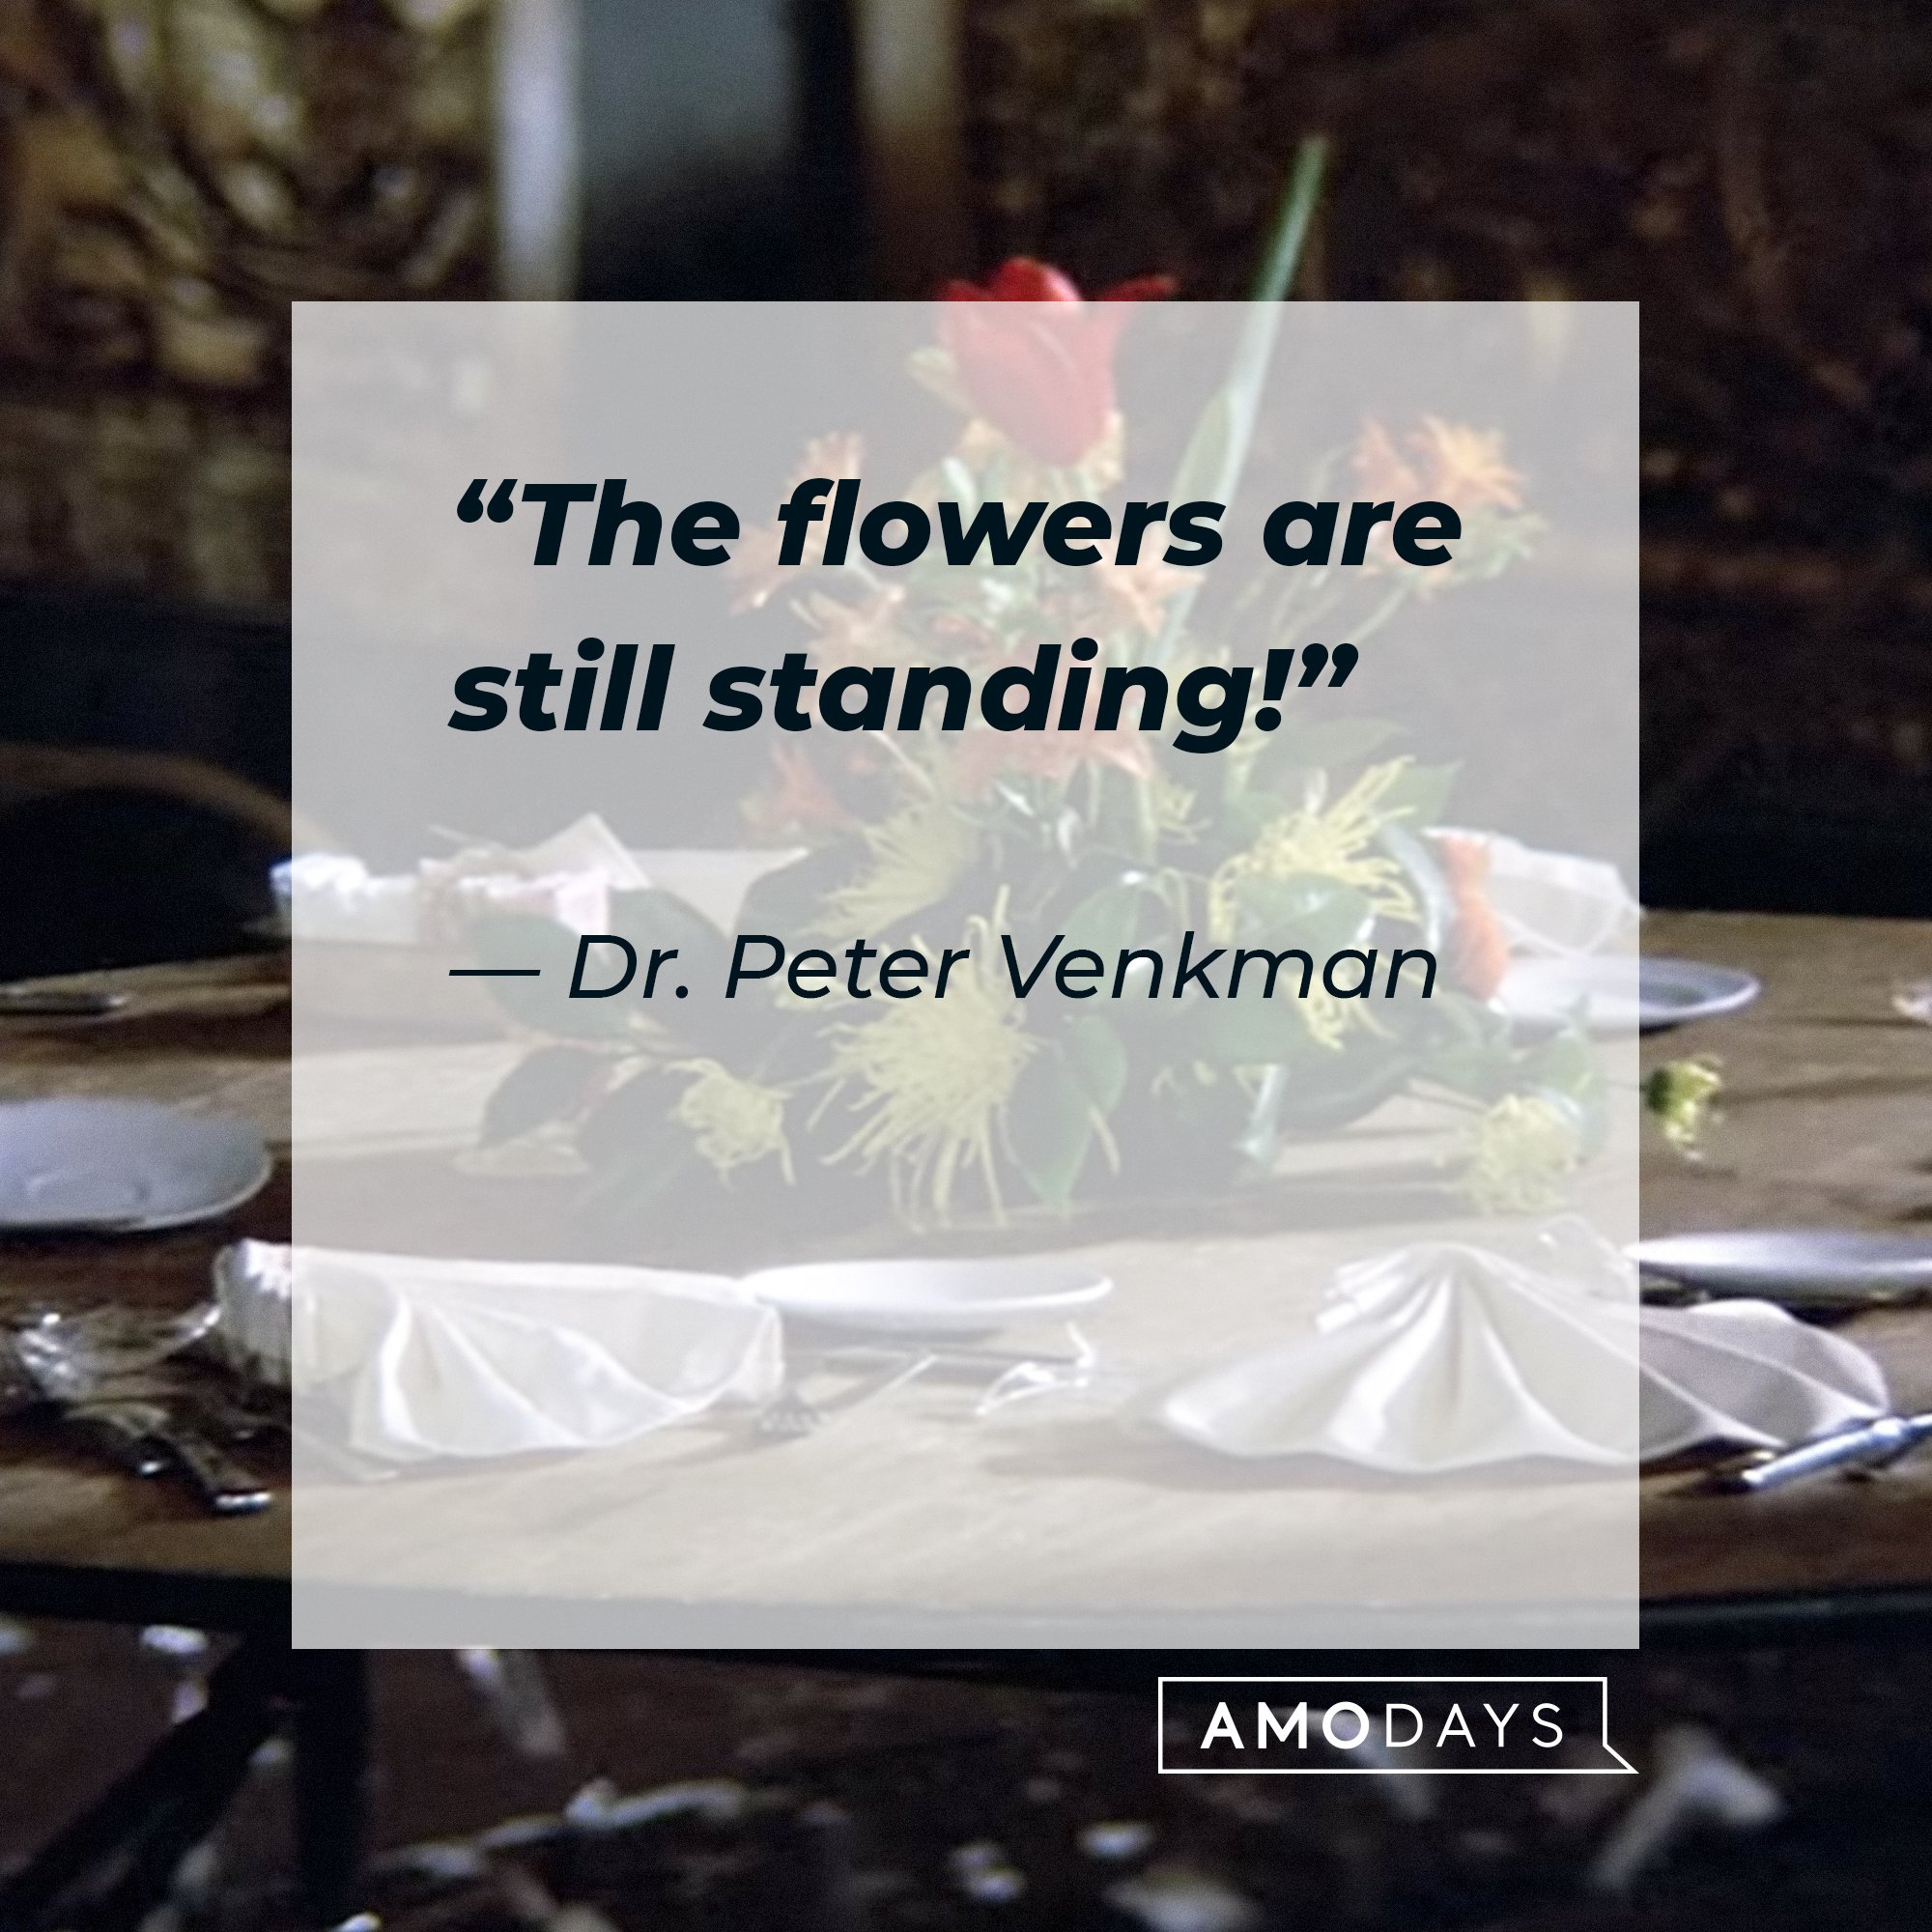 Dr. Peter Venkman's quote: “The flowers are still standing!” | Image: AmoDays